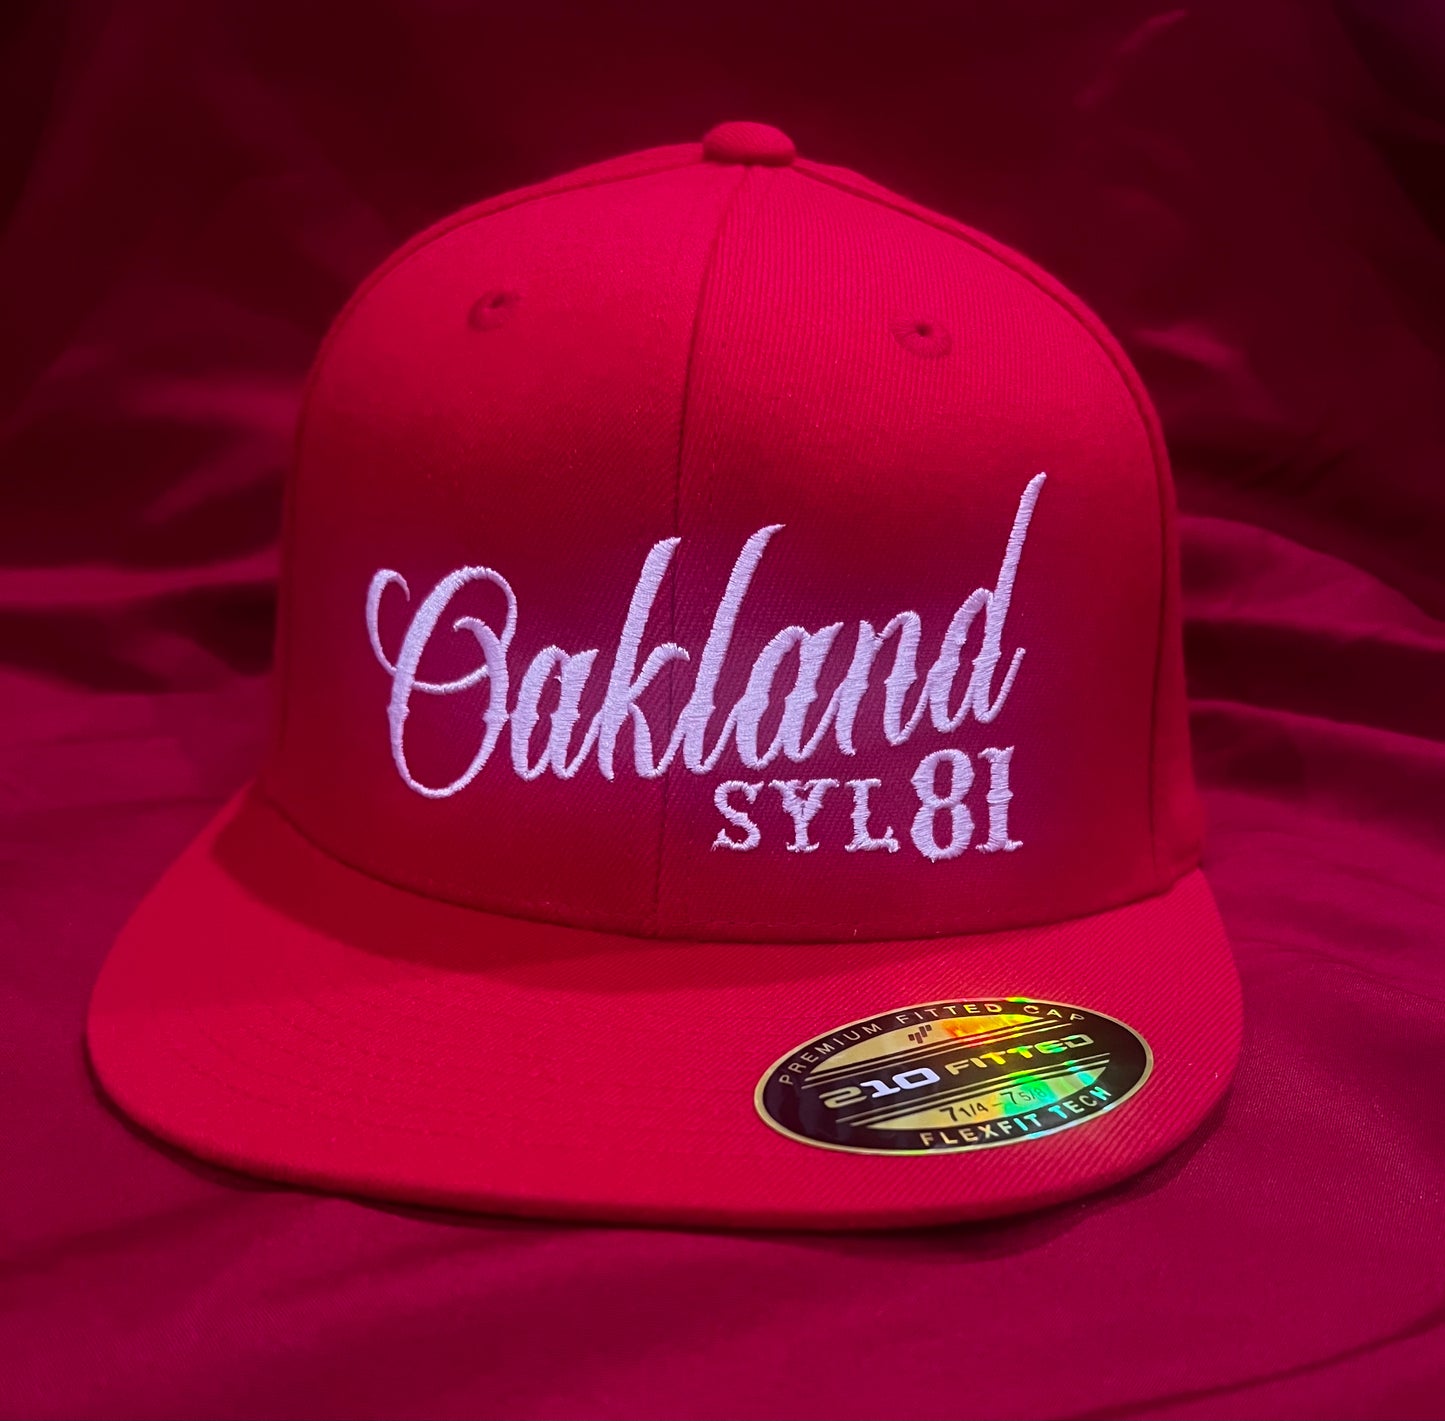 3 COLORS AVAILABLE - OAKLAND SLY81 HAT